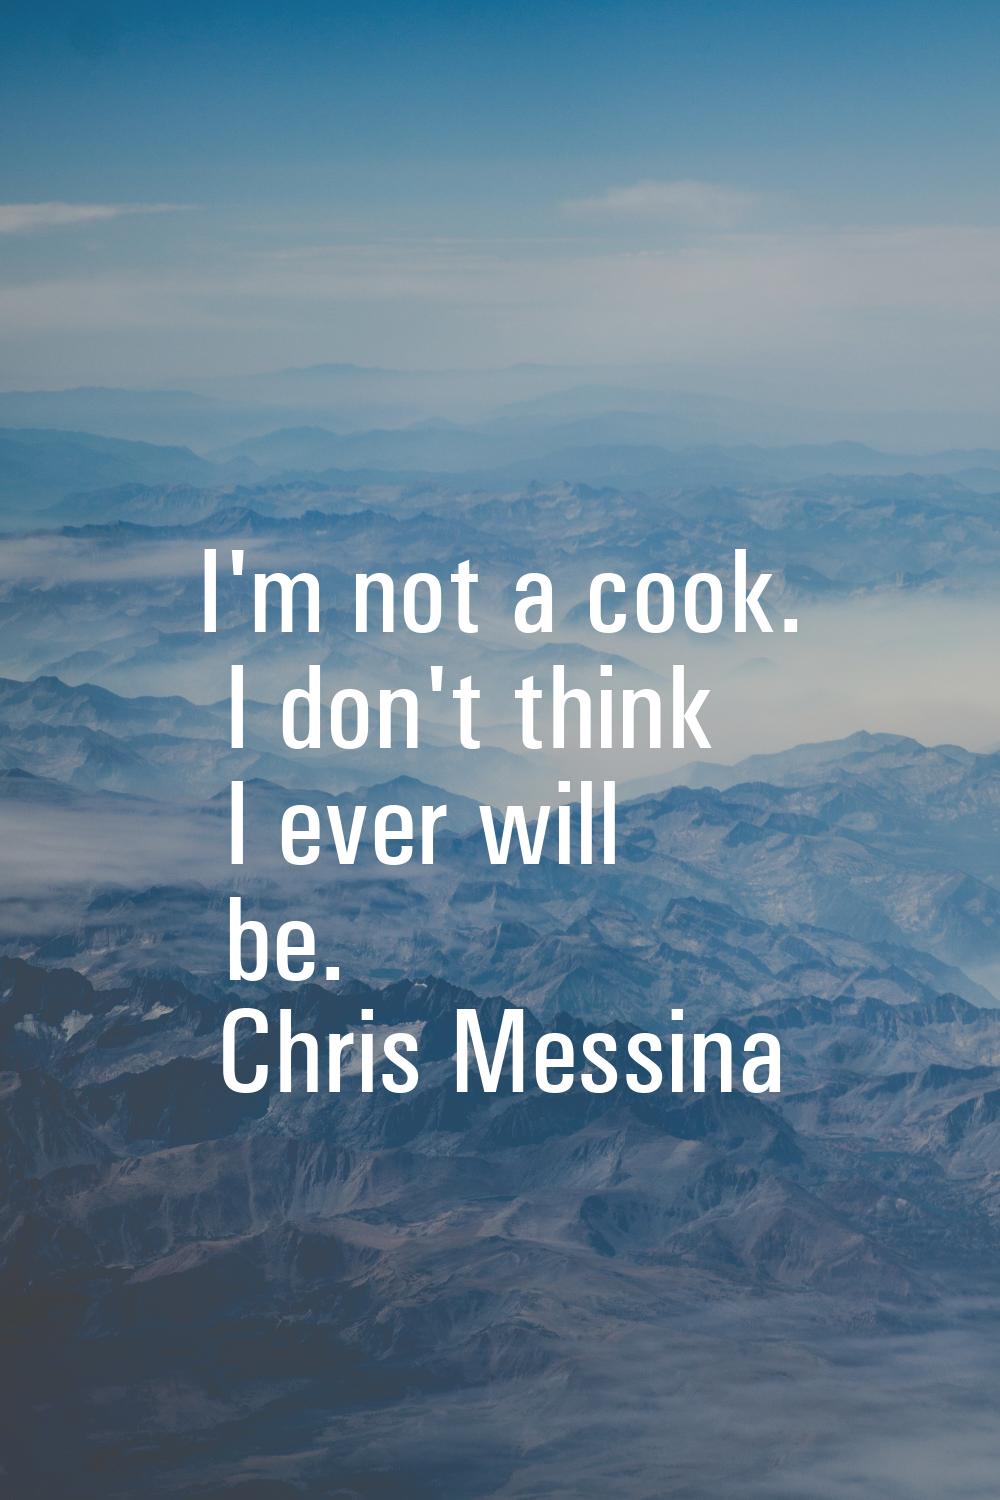 I'm not a cook. I don't think I ever will be.